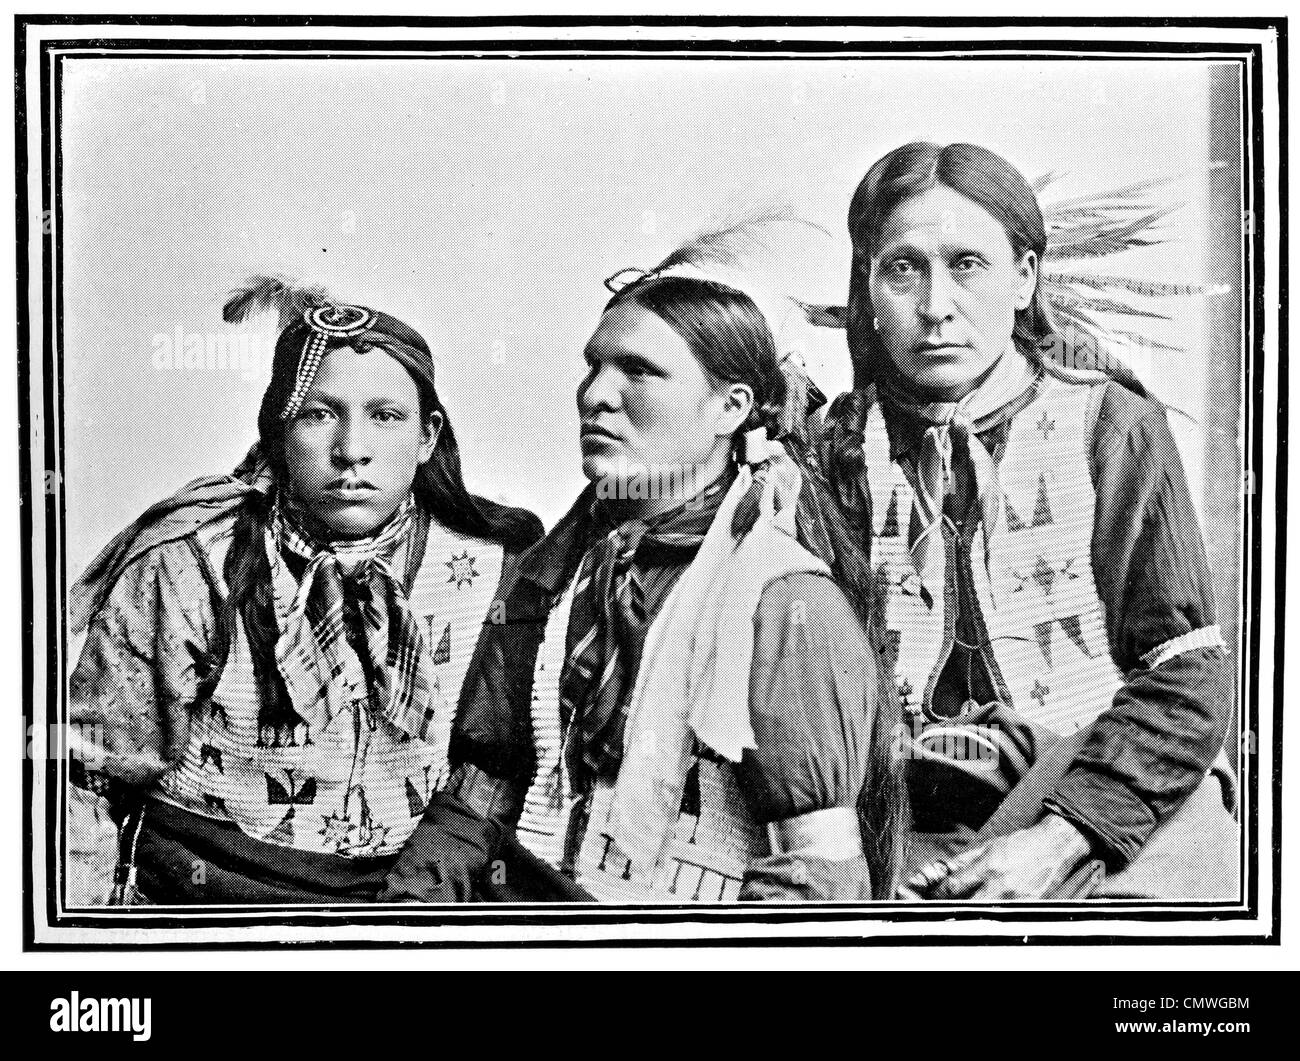 1900 North American Indian Women traditional costume Stock Photo